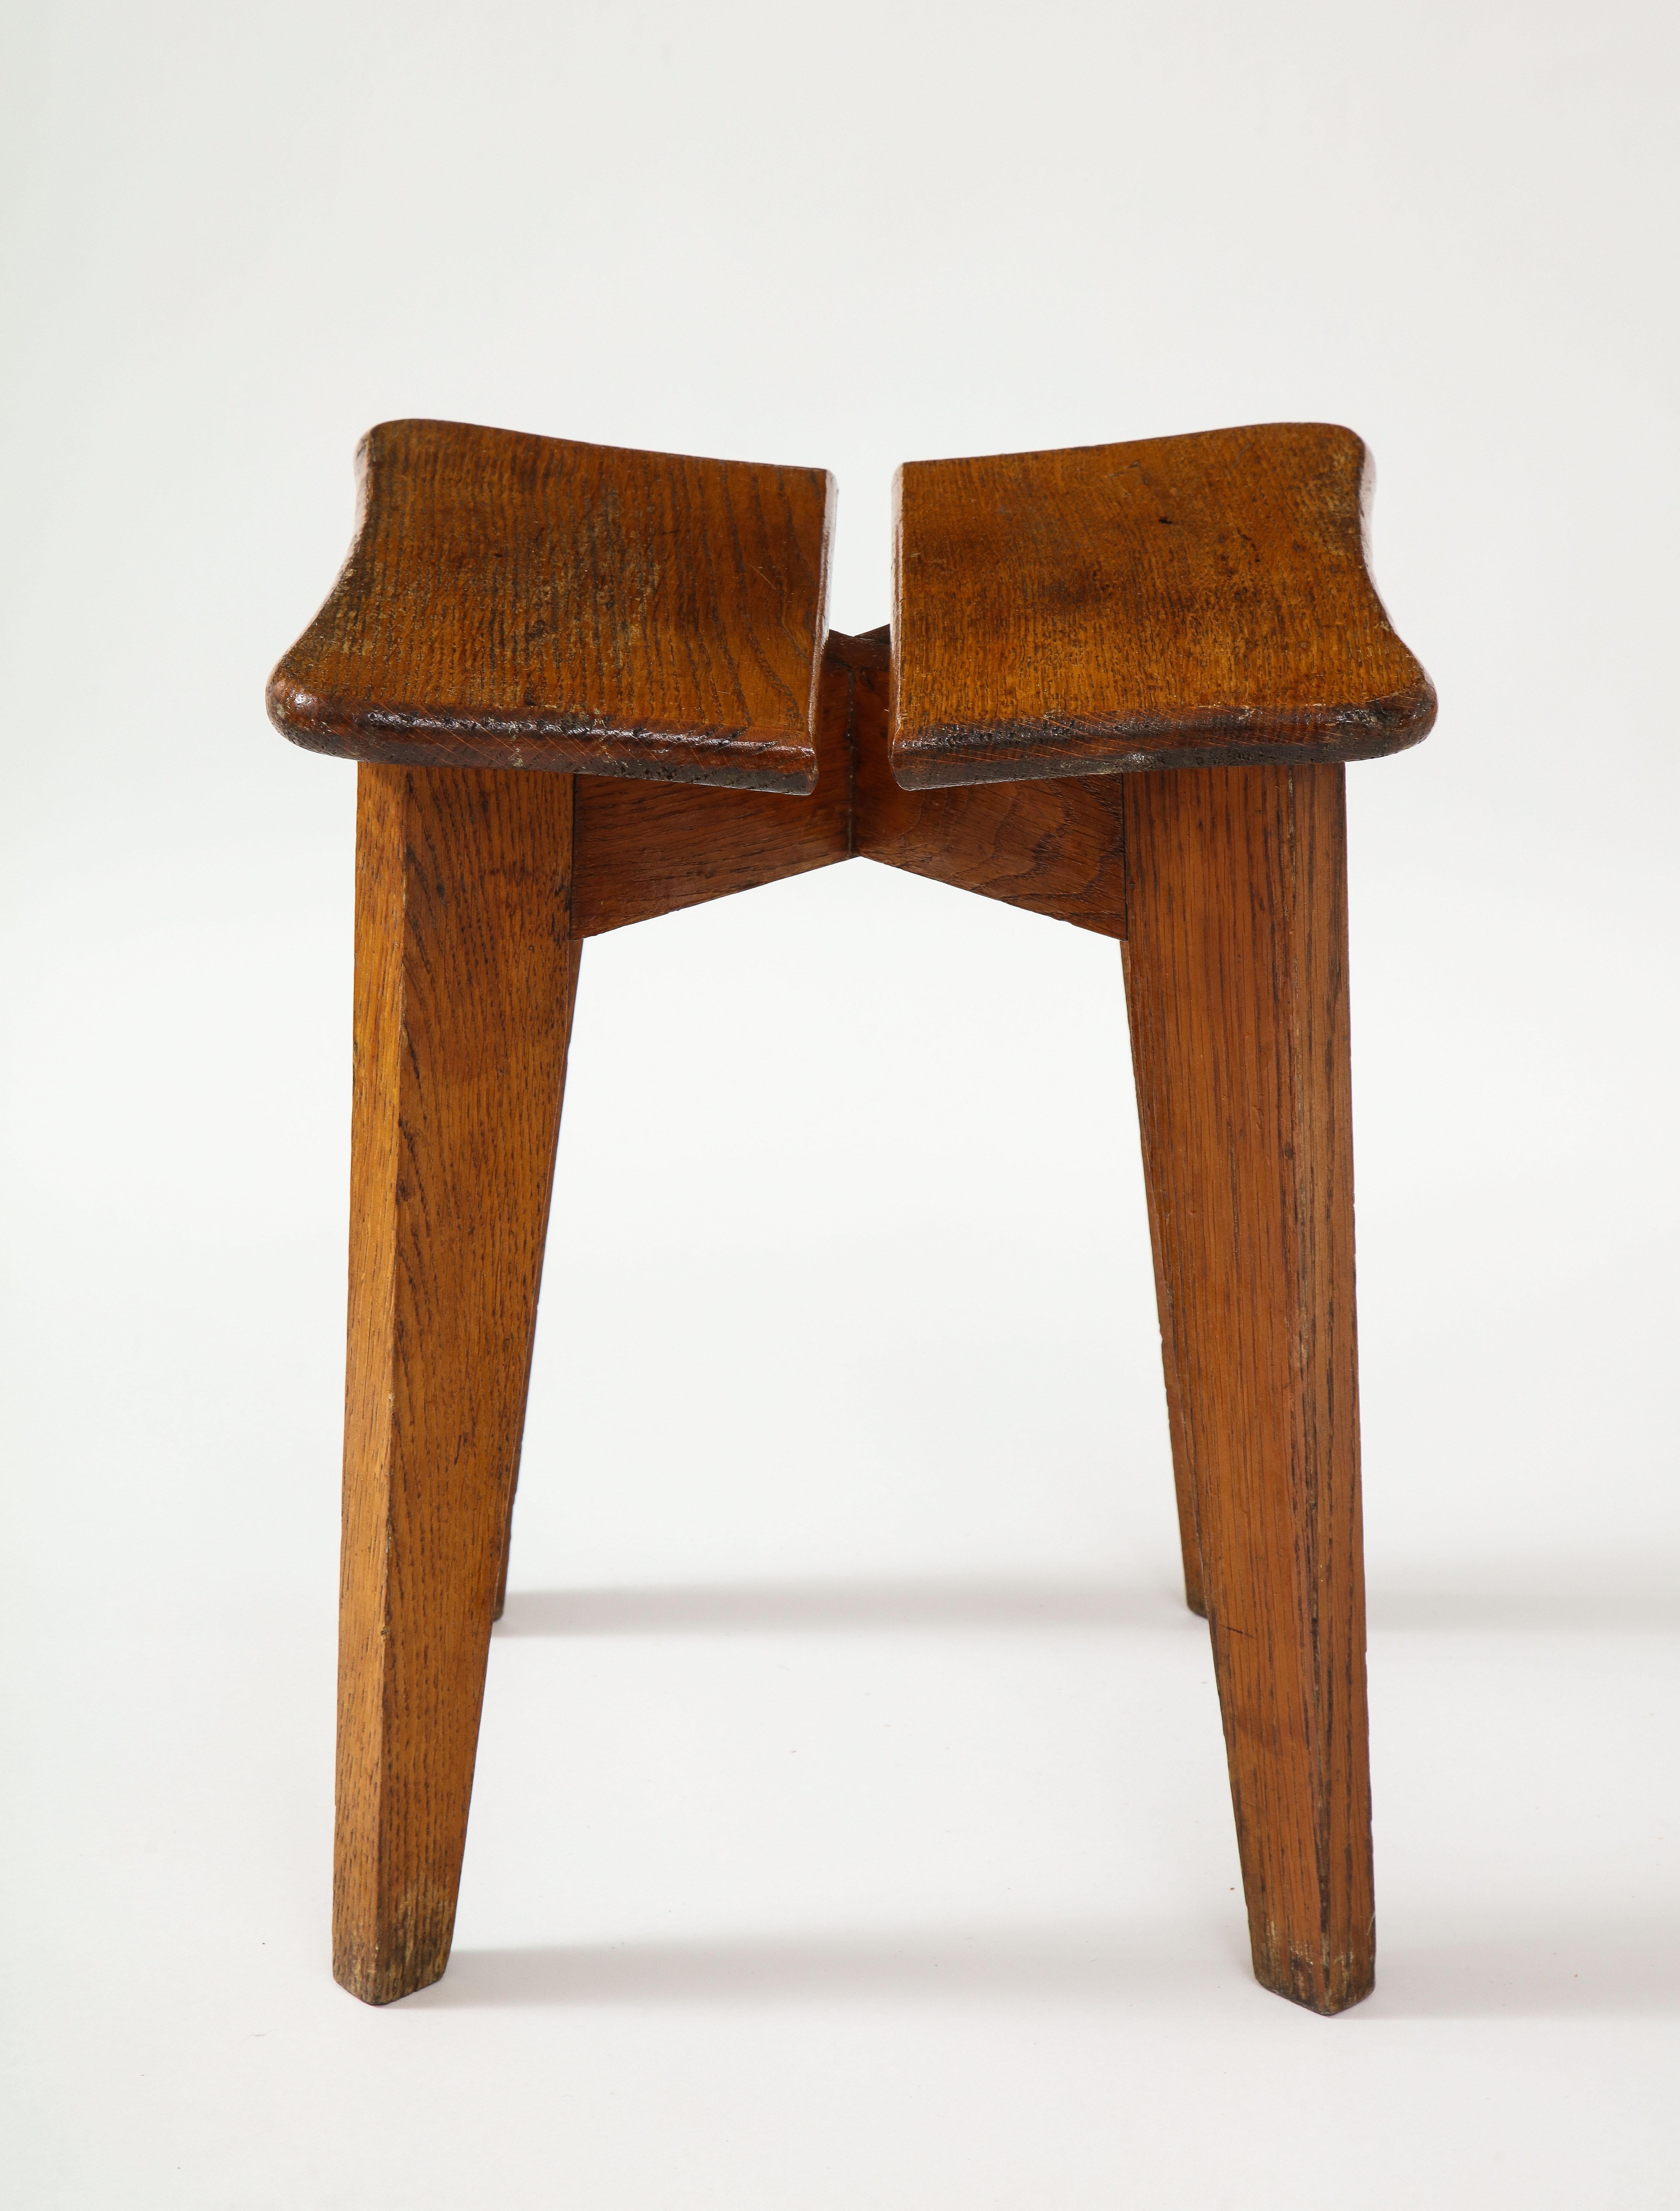 This stool is in the style of Marcel Gascoin and has a beautiful patina